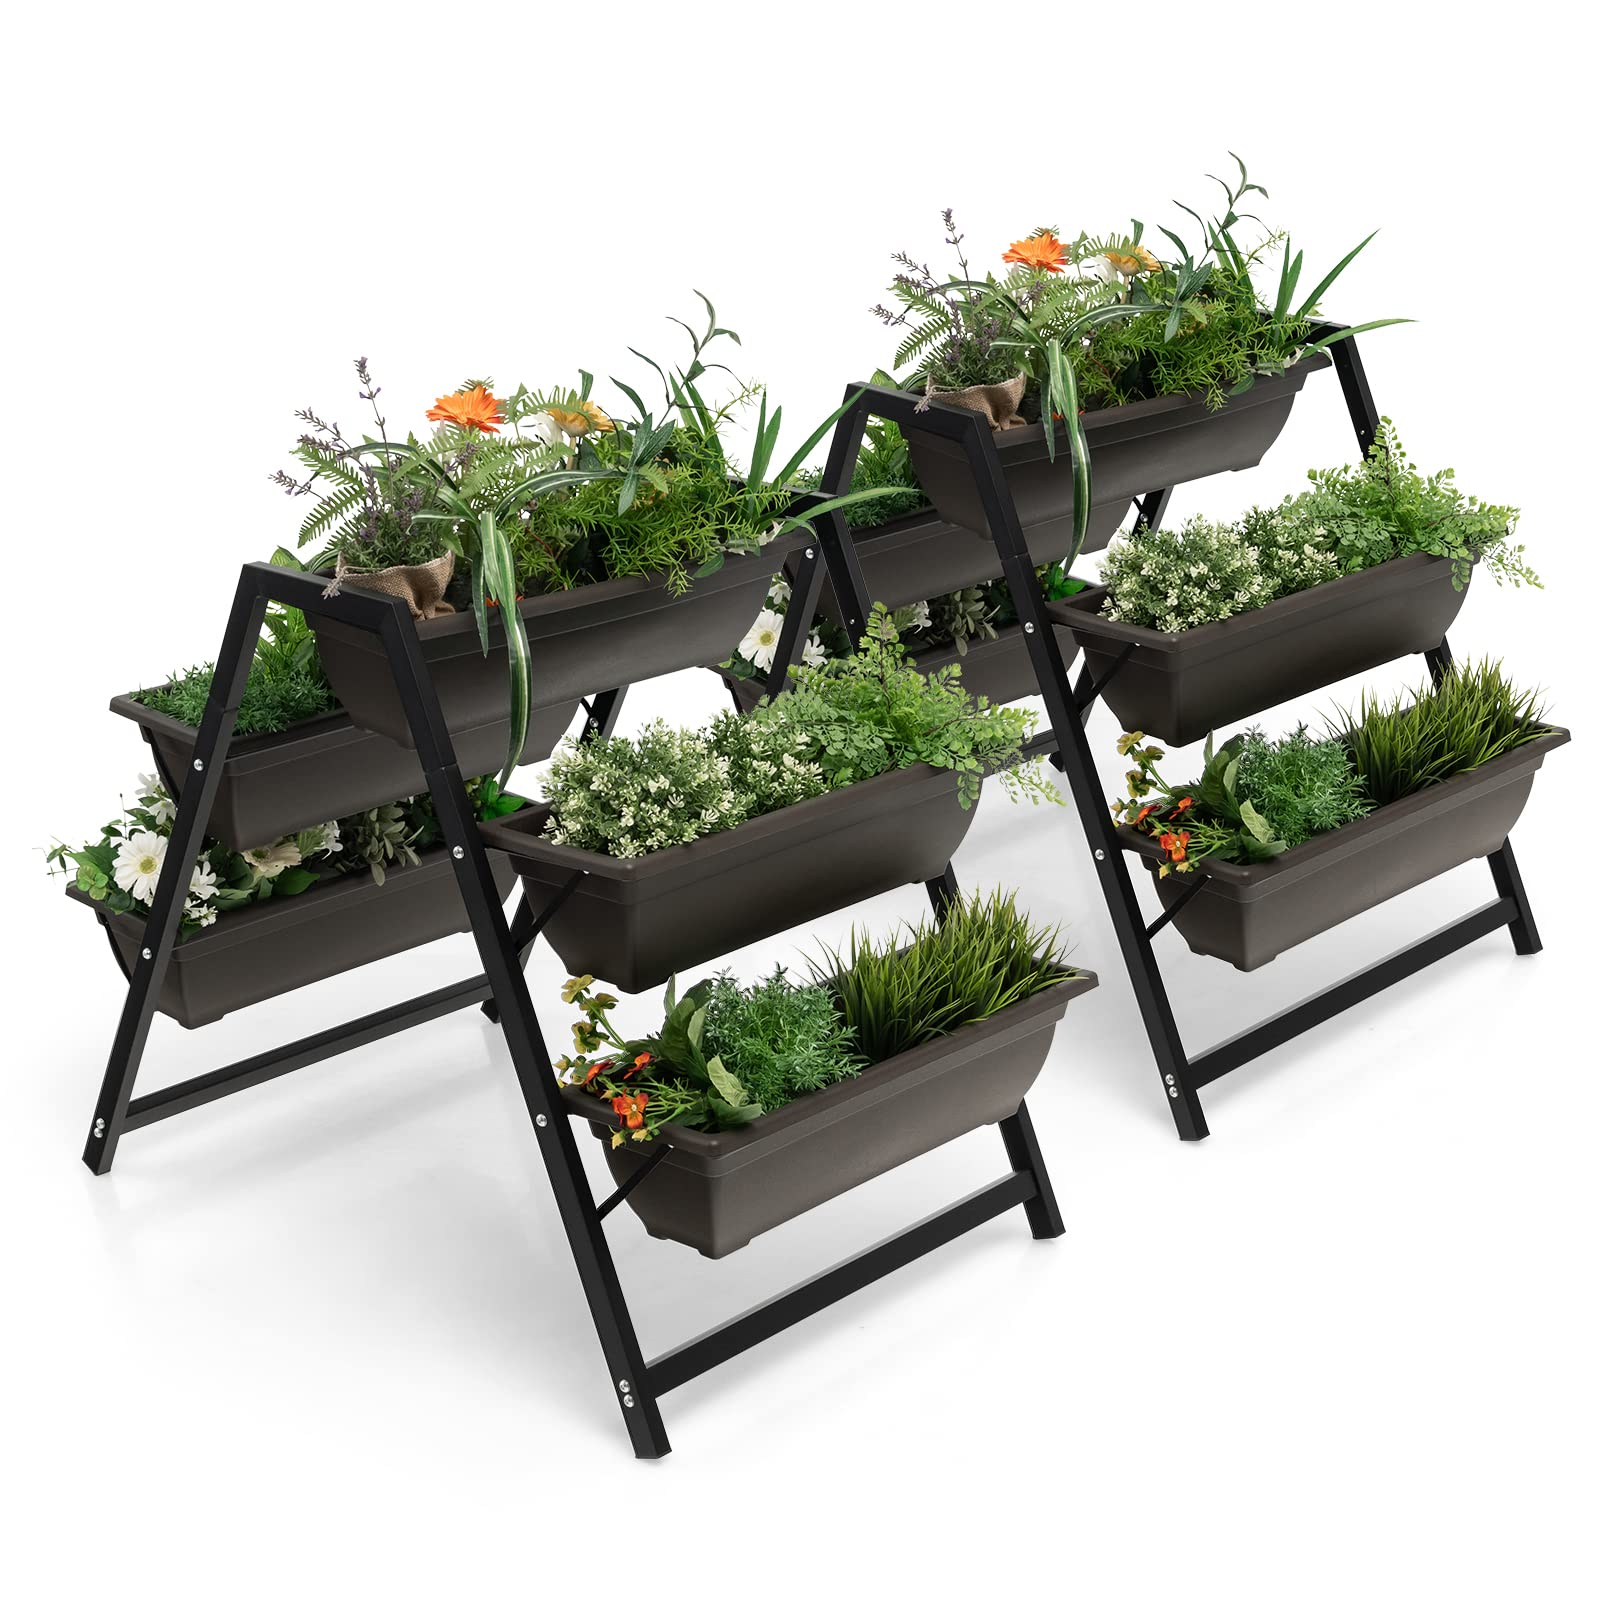 Giantex Set of 2 Vertical Raised Garden Bed, 5 Planter Boxes Container w/ Drainage Holes